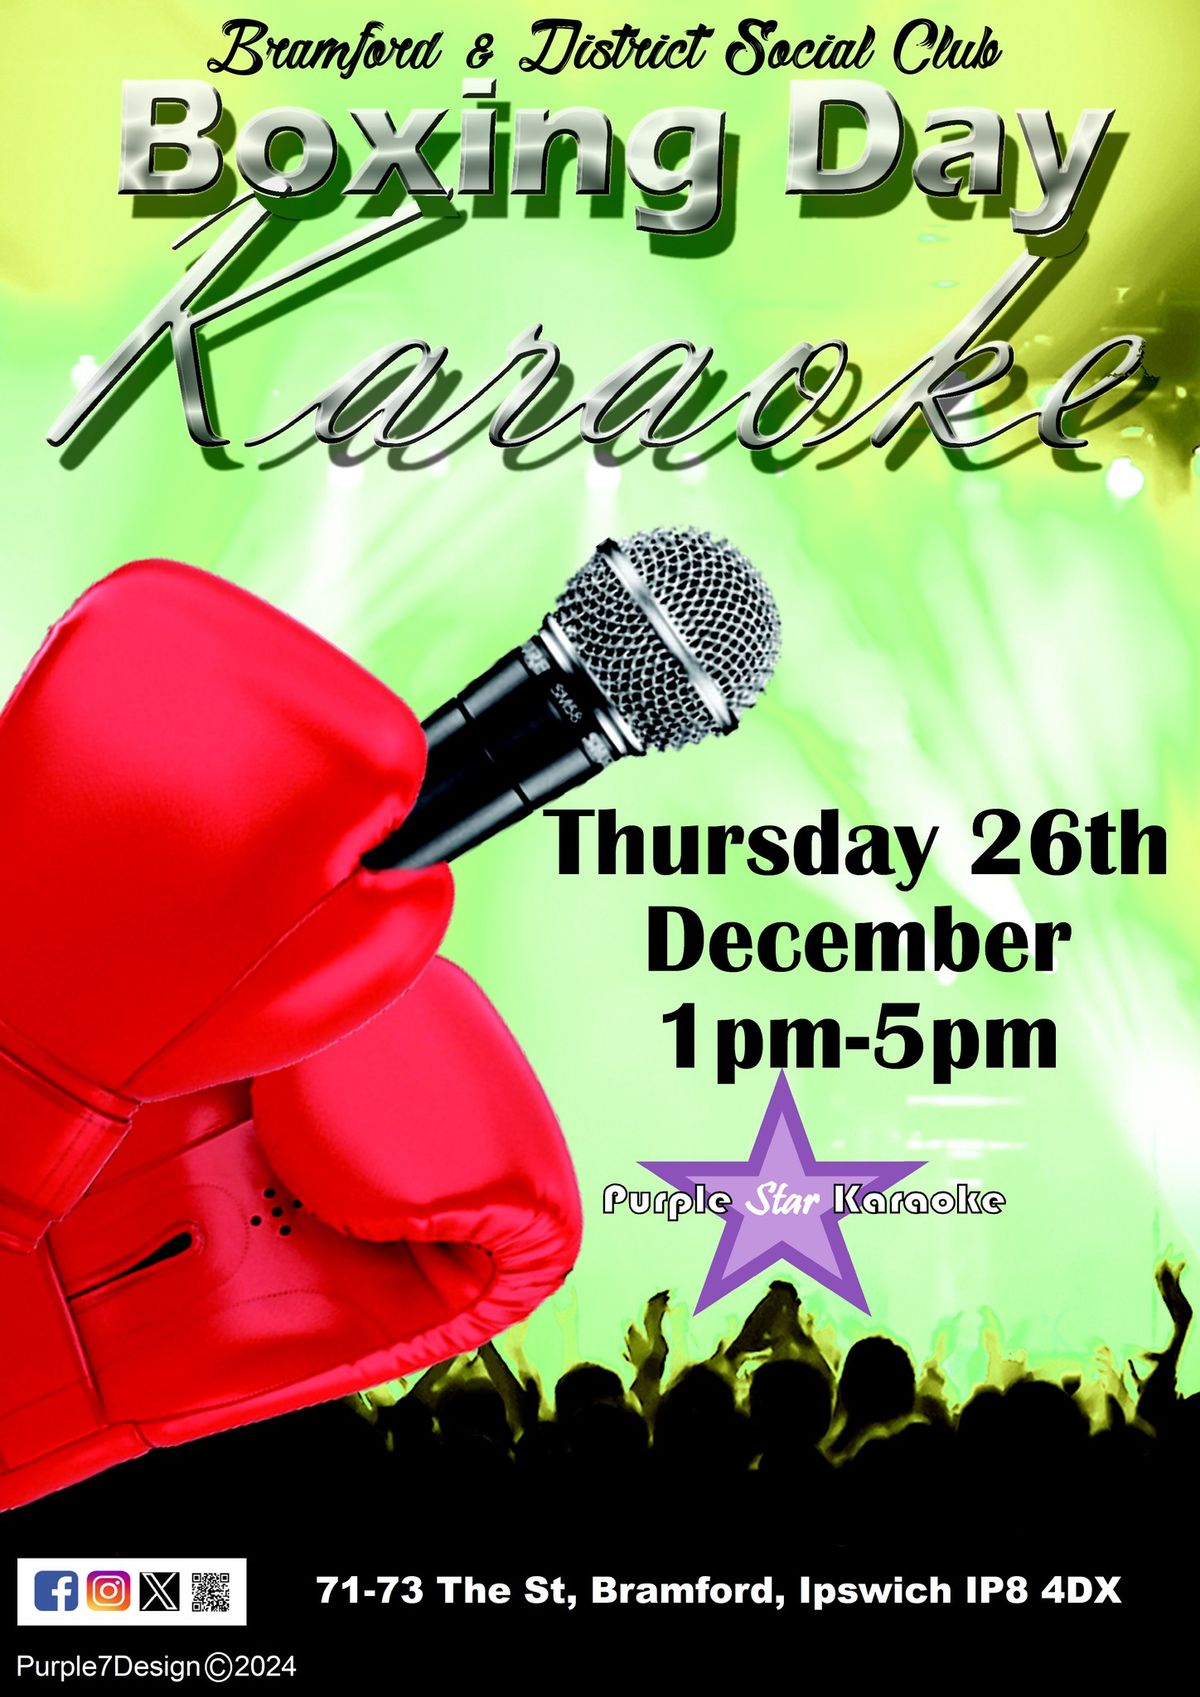 Boxing Day Karaoke at The Bramford and District Social Club